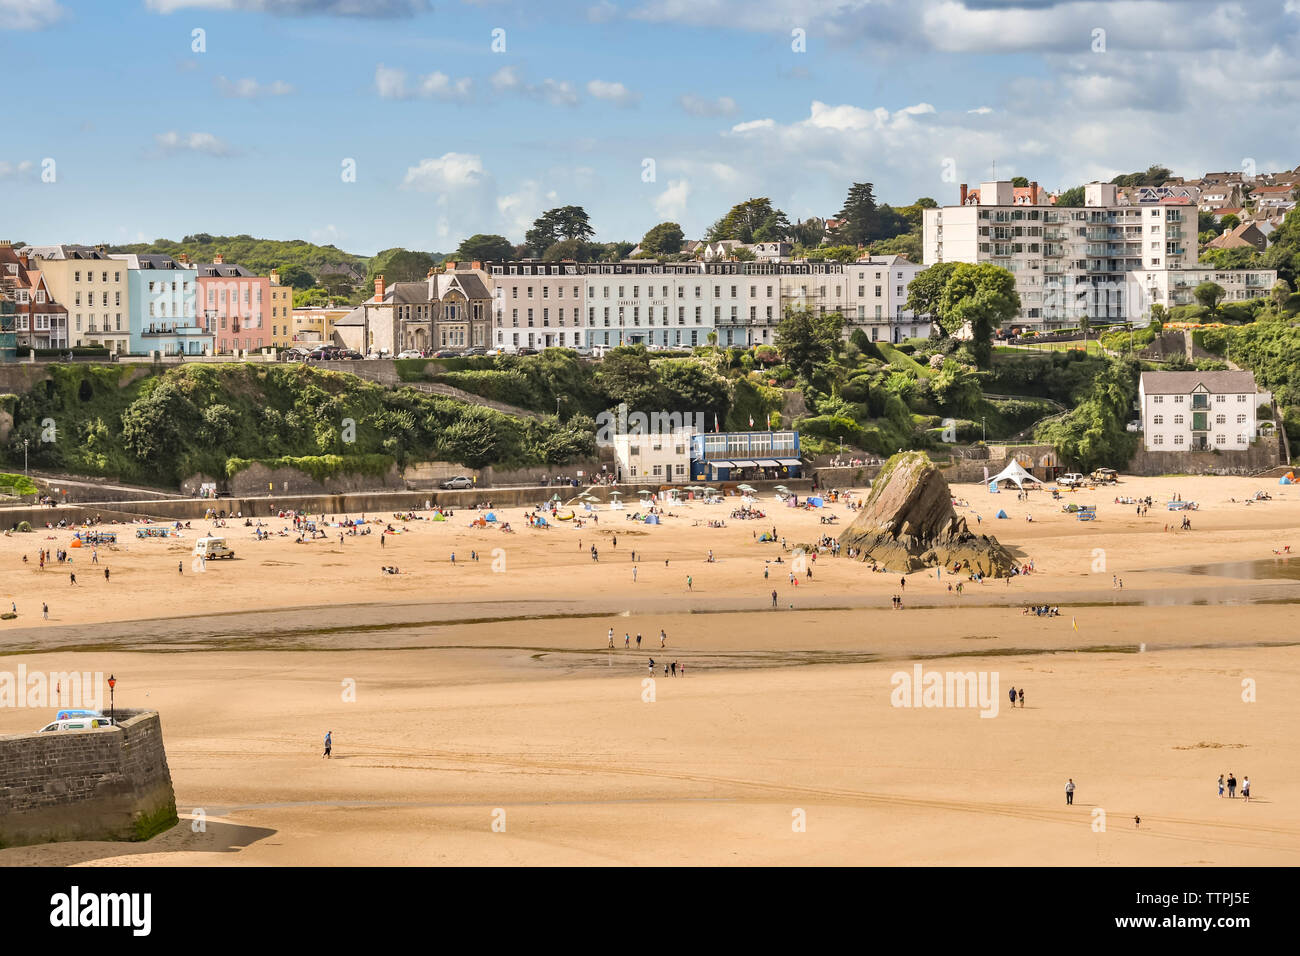 TENBY, PEMBROKESHIRE, WALES - AUGUST 2018: People on the South Beach in Tenby, West Wales, at low tide. Stock Photo